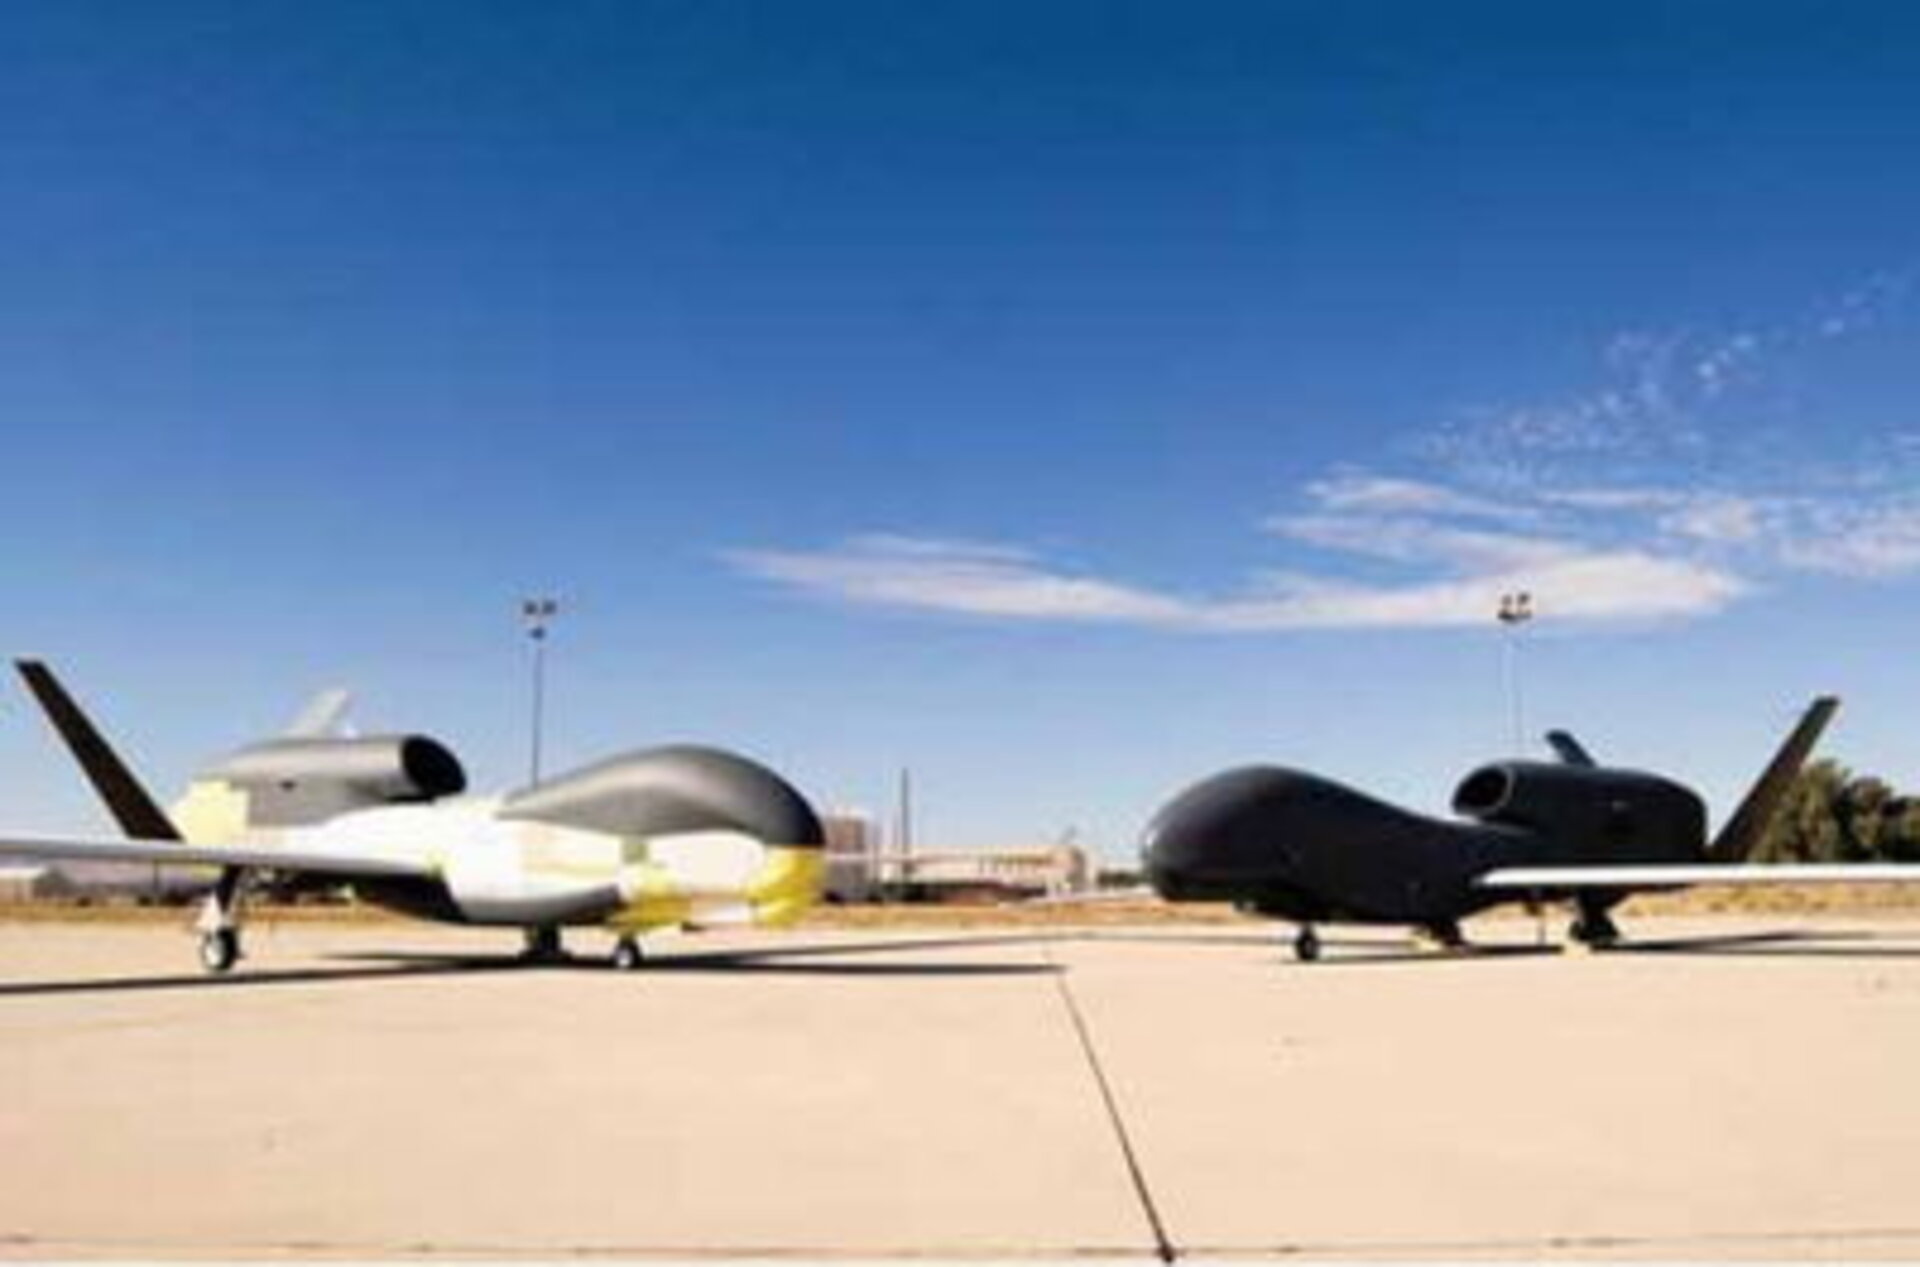 Europe-based Unmanned Aerial Vehicles (UAVs)